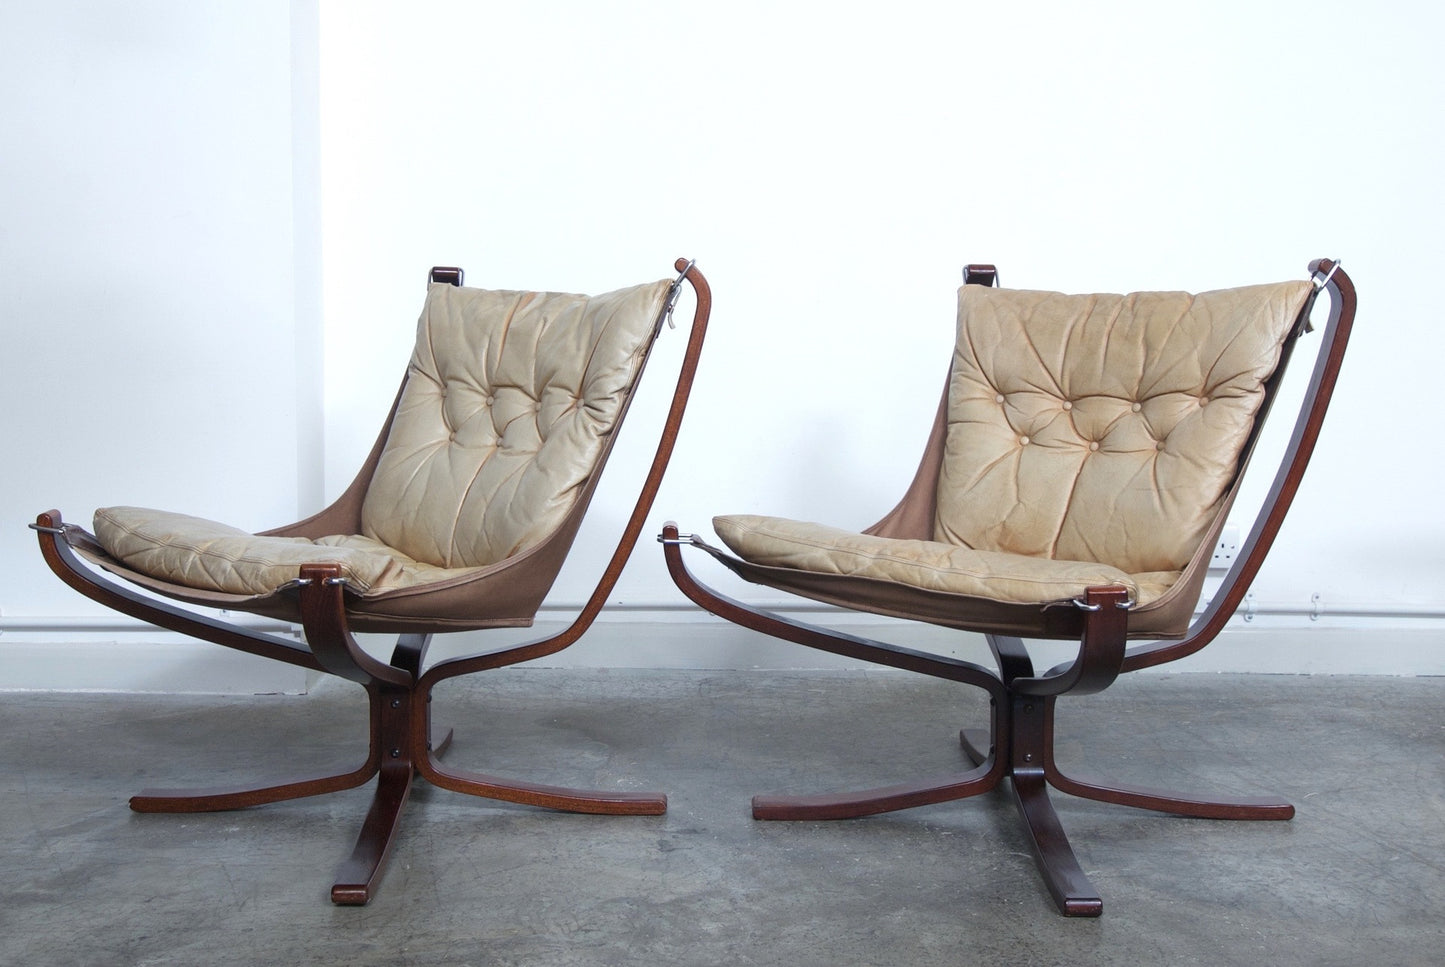 Pair of Falcon chairs